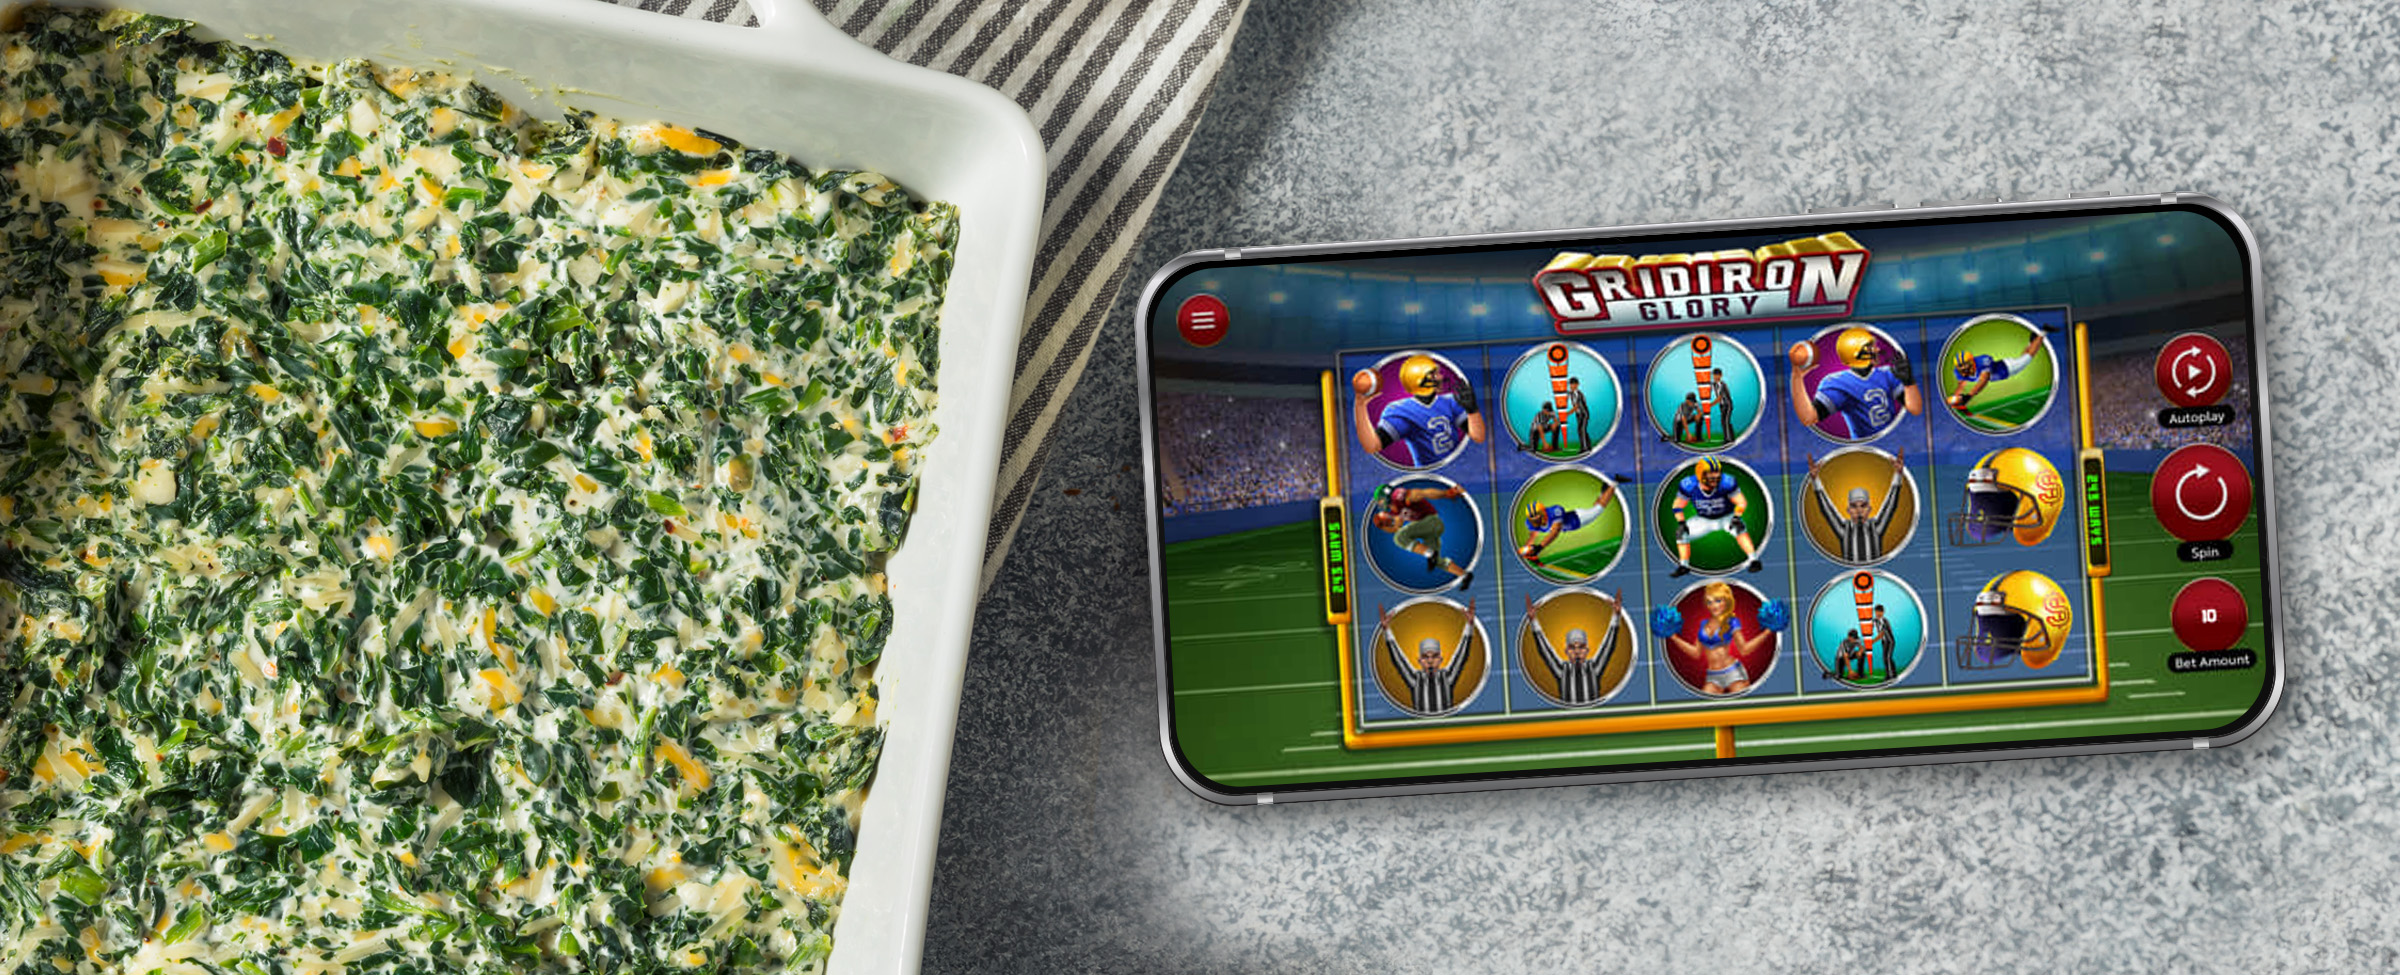 A mobile phone showing a screen from the Cafe Casino slot game ‘Gridiron Glory’ sits on a table to the right of a dish with baked spinach dip.